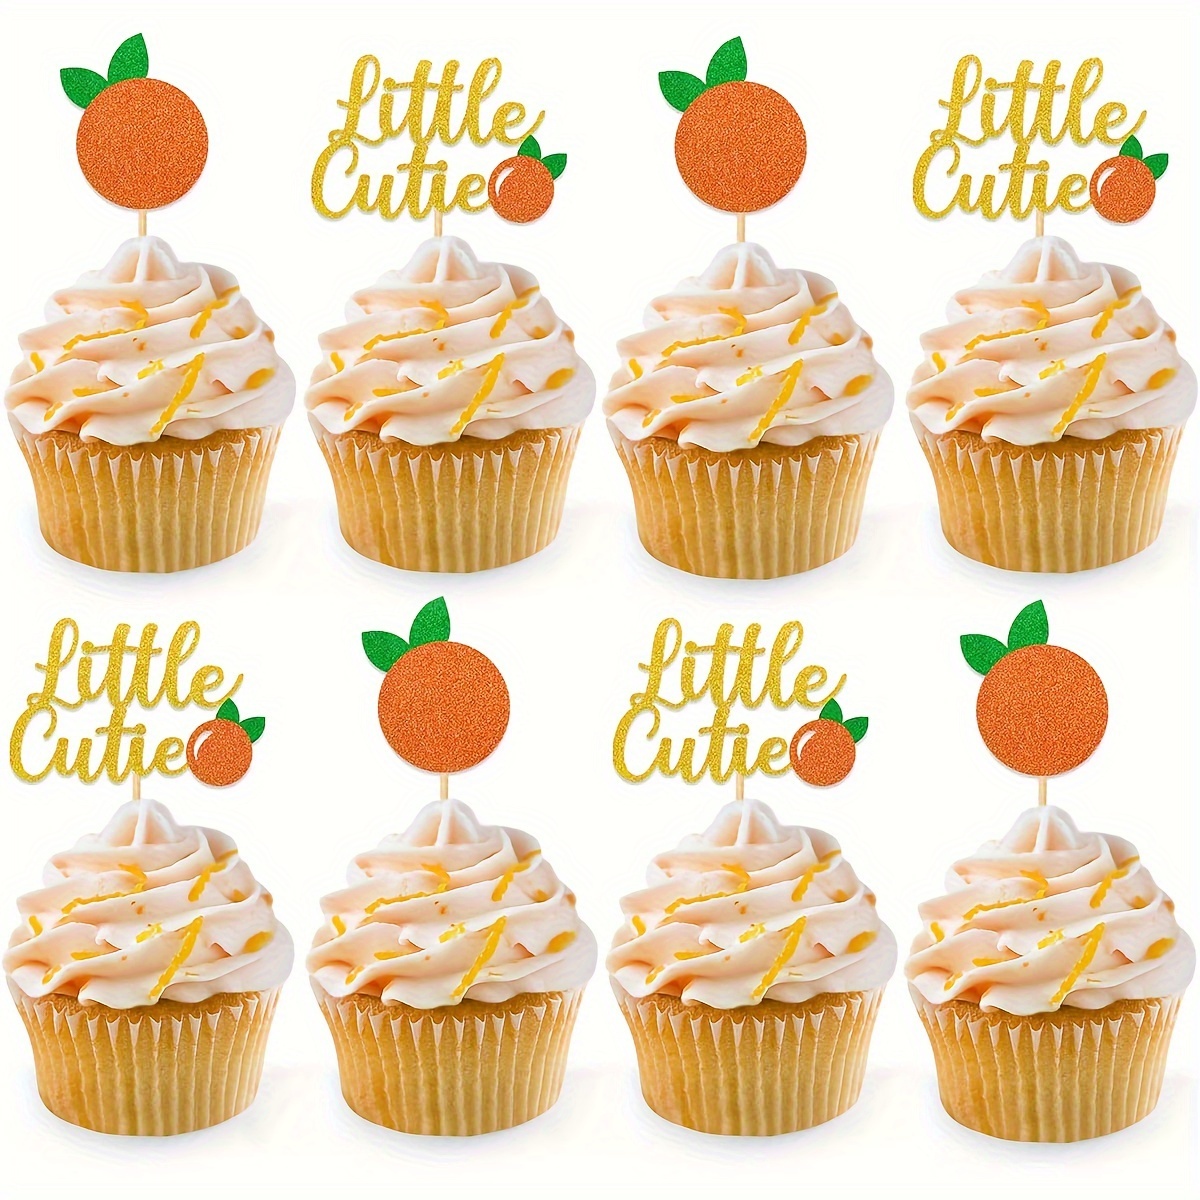 

12pcs Cute Orange Glitter Cupcake Toppers - Perfect For Baby Shower & Birthday Parties, Clementine Themed Decorations Cake Topper Decorations Cake Decoration Accessories